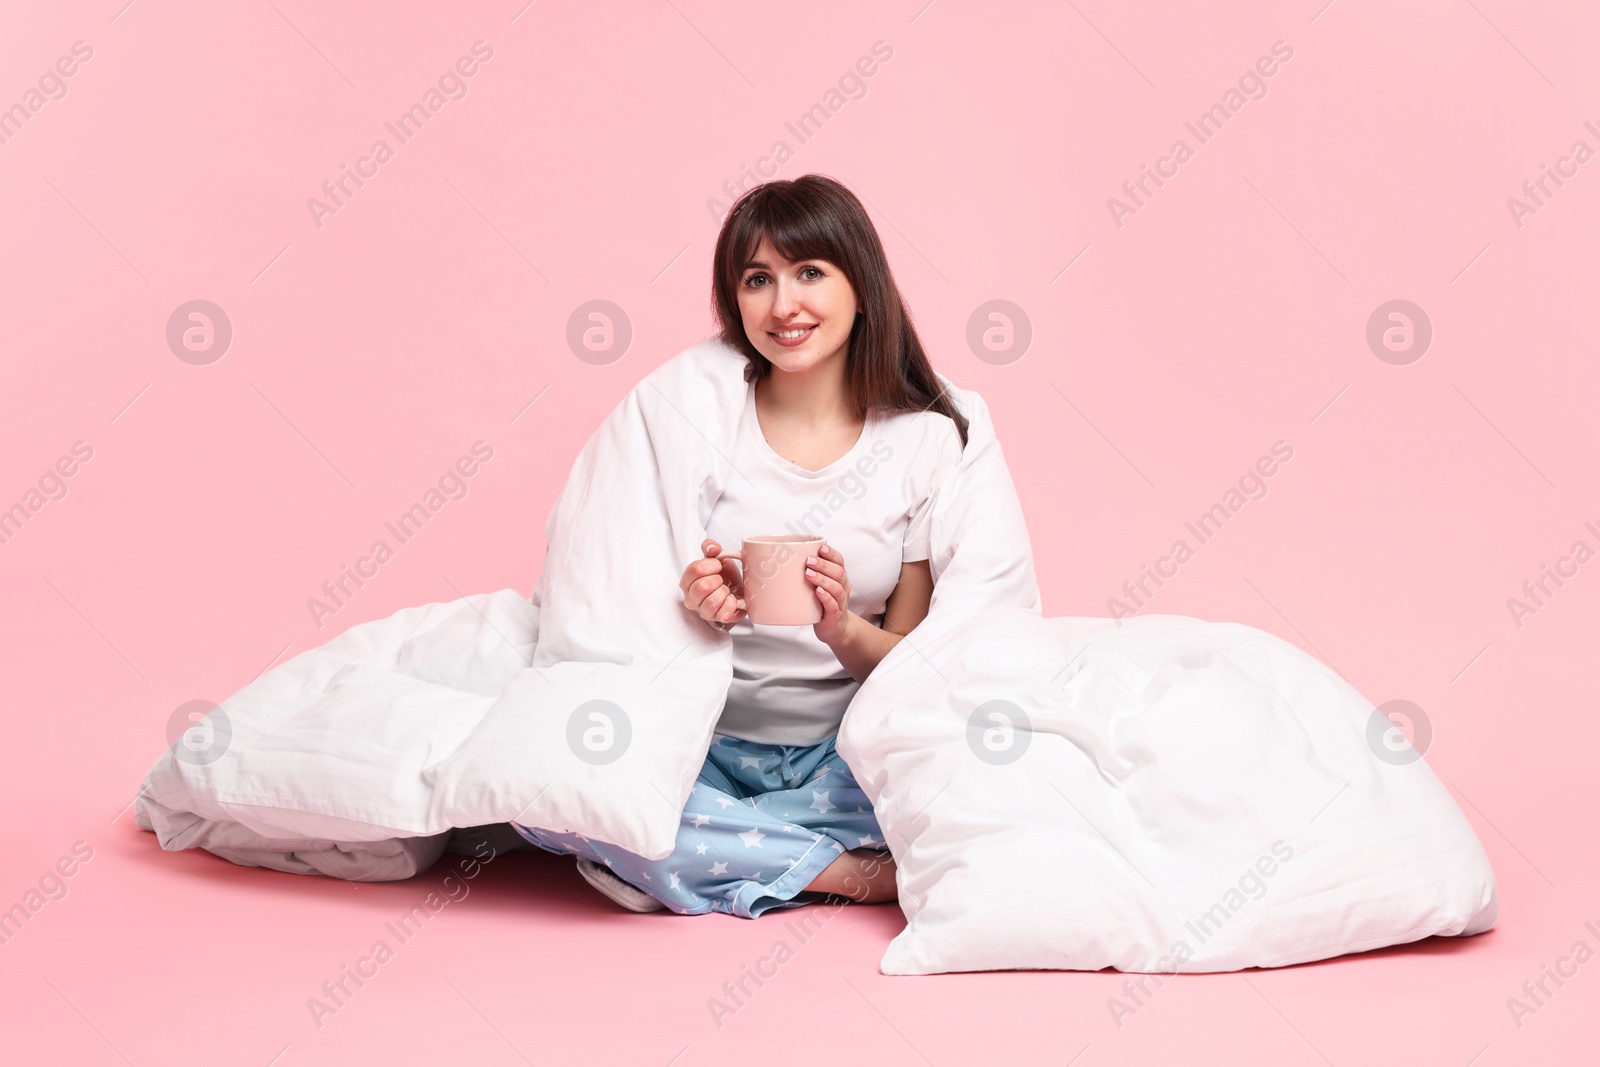 Photo of Happy woman with pyjama and blanket holding cup of drink on pink background